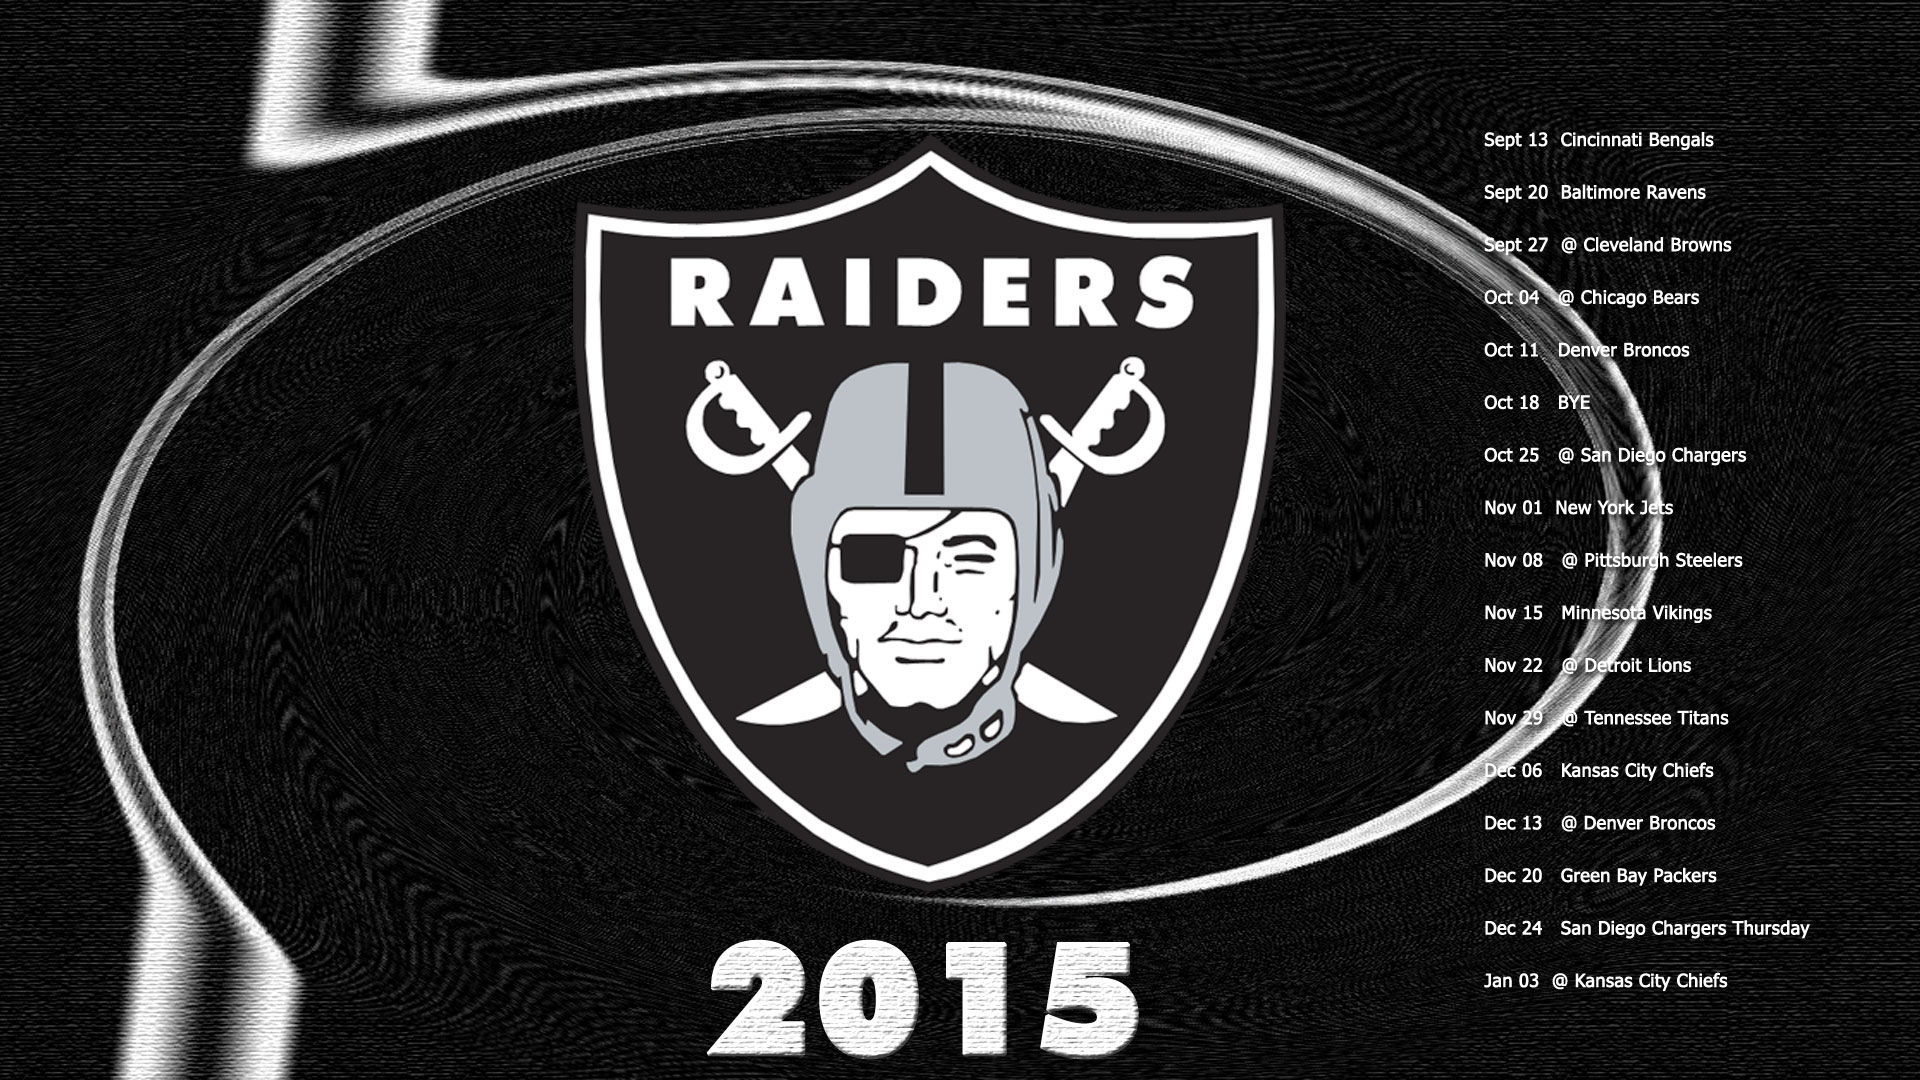 Oakland Raiders Wallpaper 2015 | Full HD Pictures